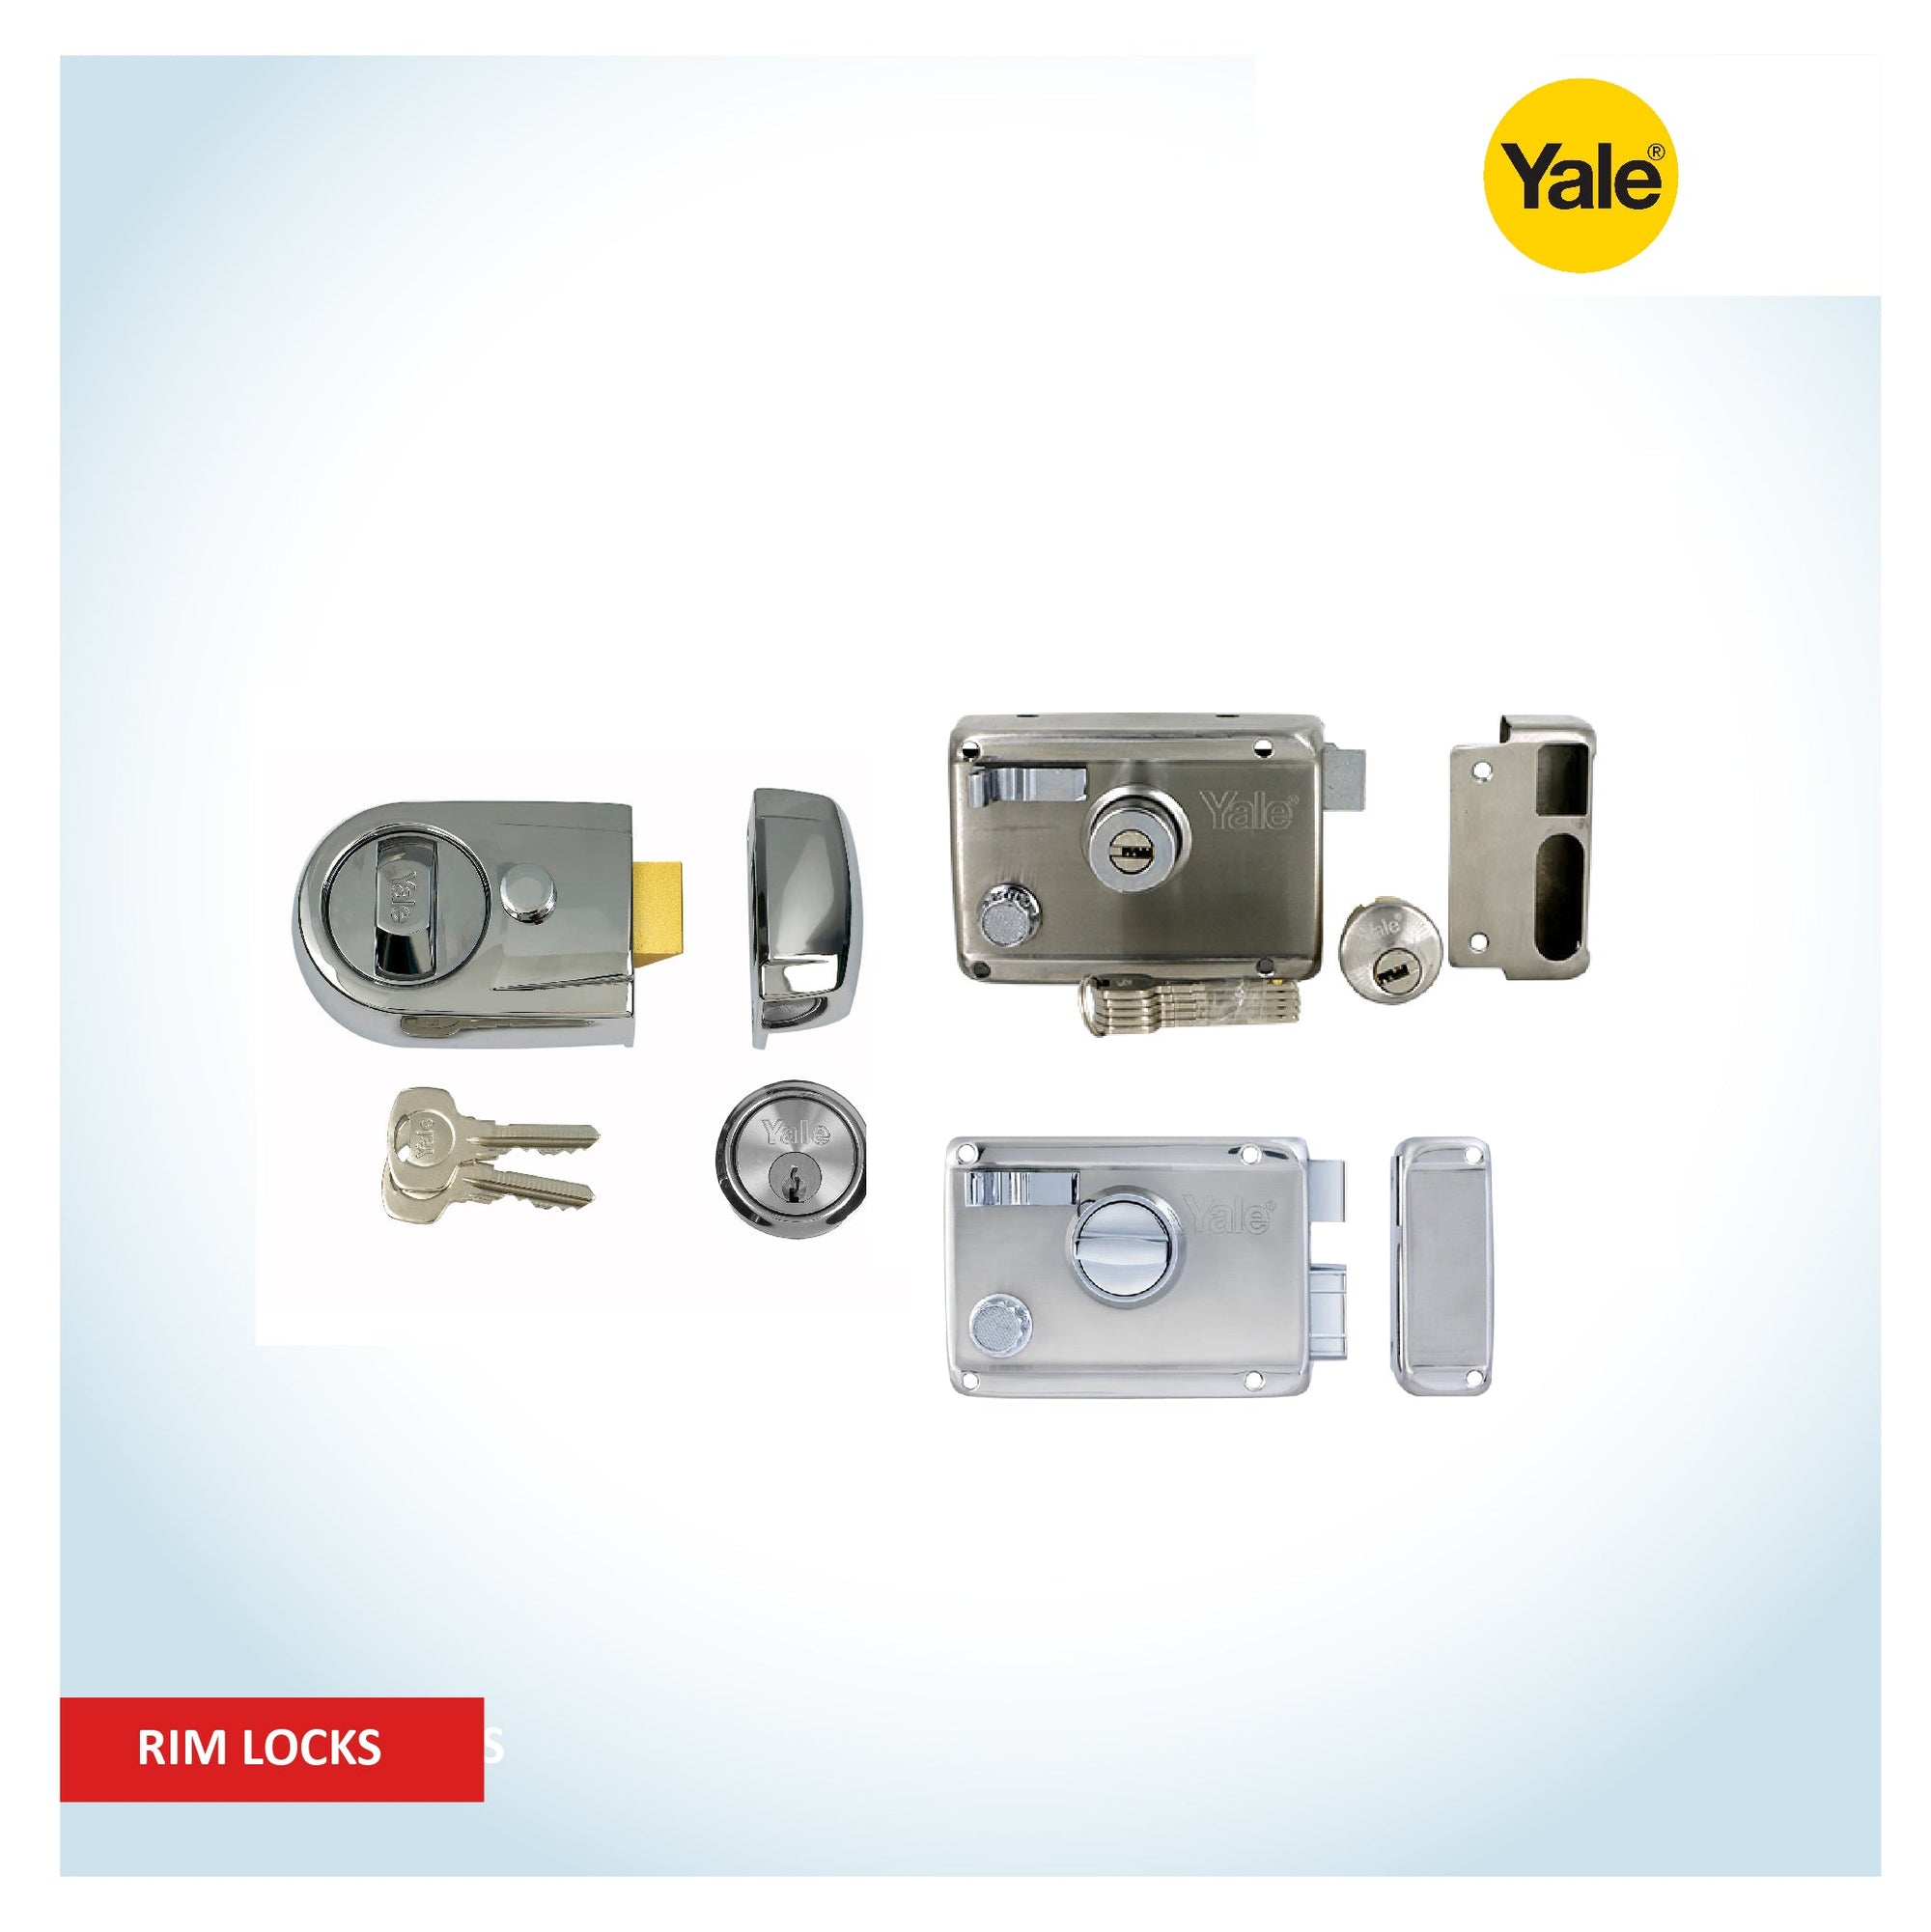 Yale Rim Locks - Secure your doors with trusted Yale Rim Locks available at M. M. Noorbhoy & Co.